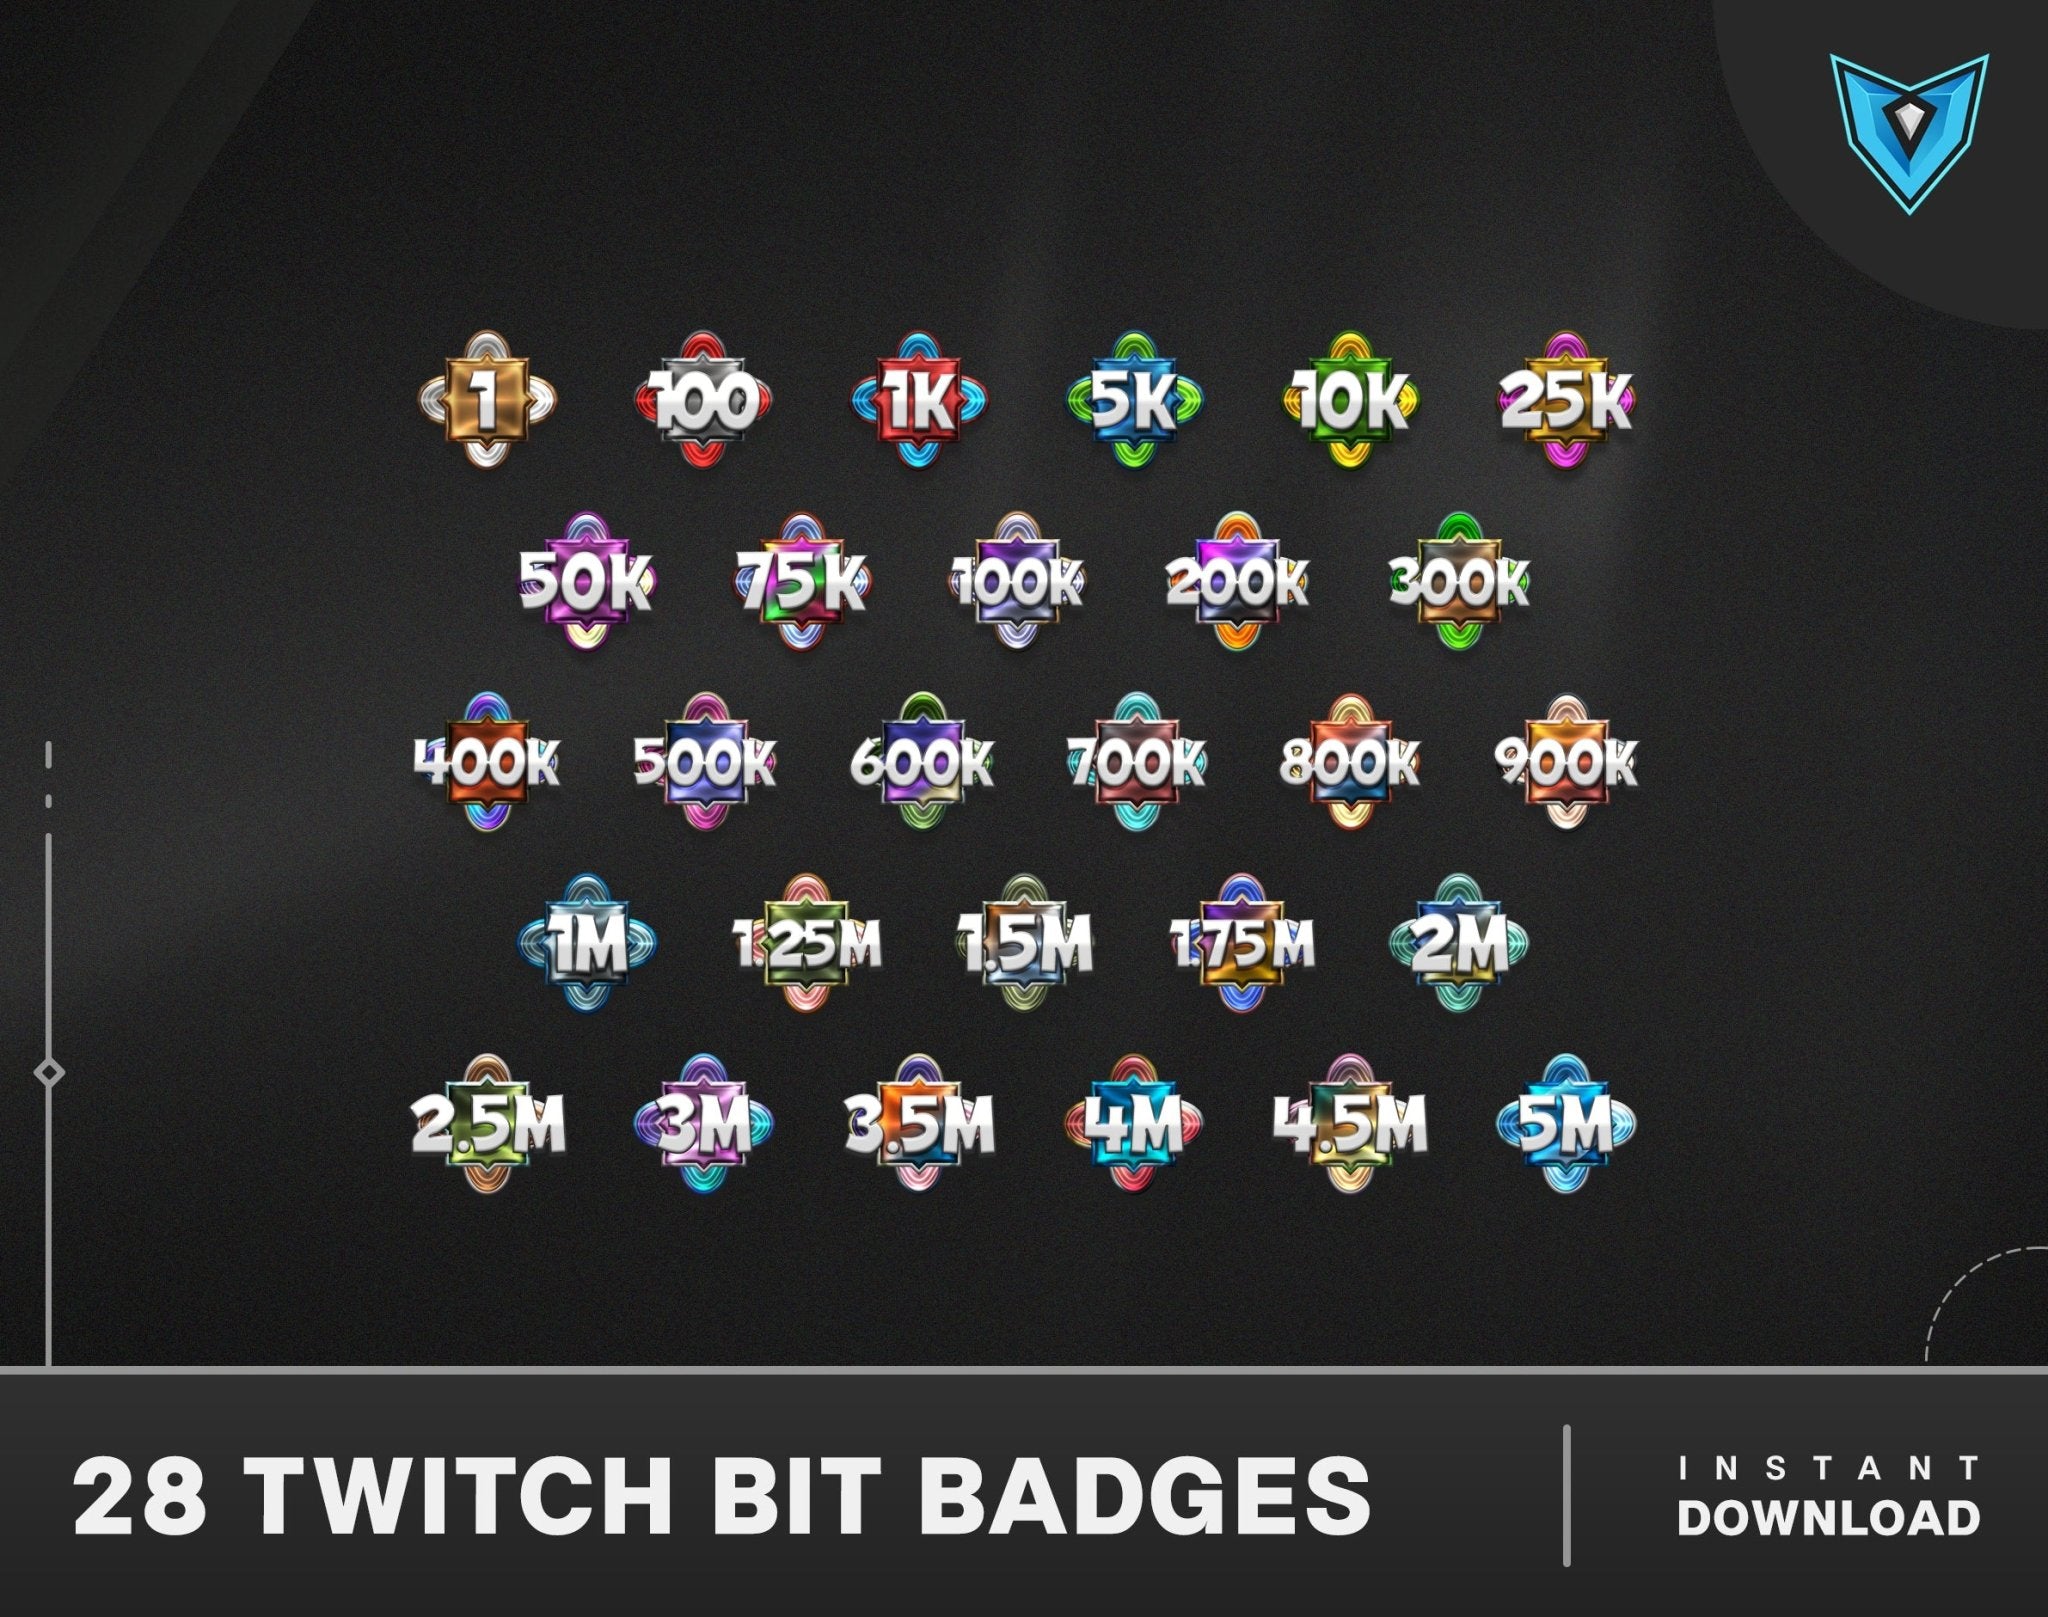 Bits Badges For Twitch, Subscribe Badges, Cheer Badges, Numbers